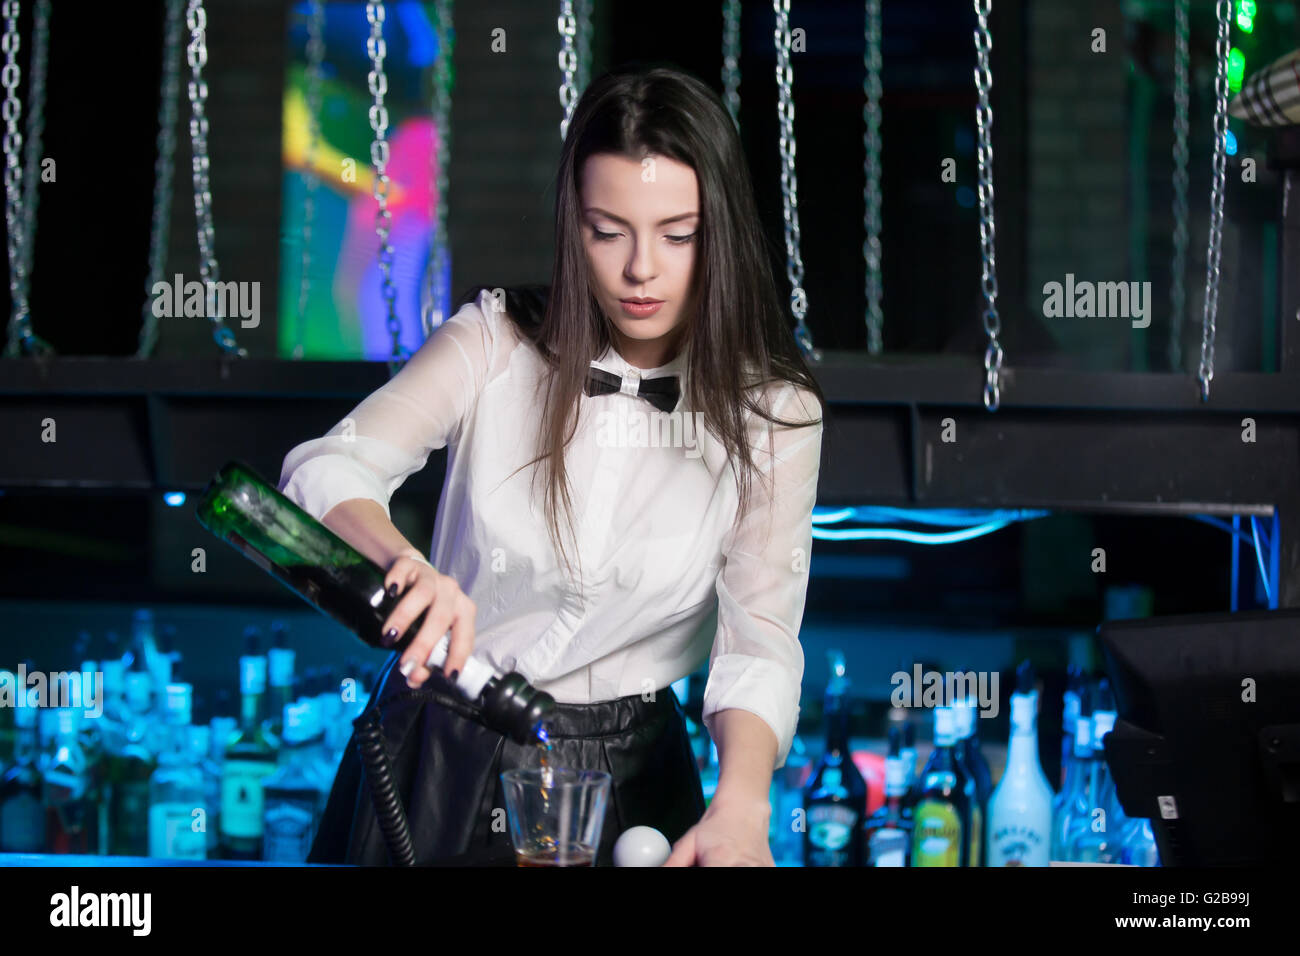 Beautiful brunette bartender girl wearing white shirt and black bow tie, serving alcohol drink at bar counter, holding bottle Stock Photo